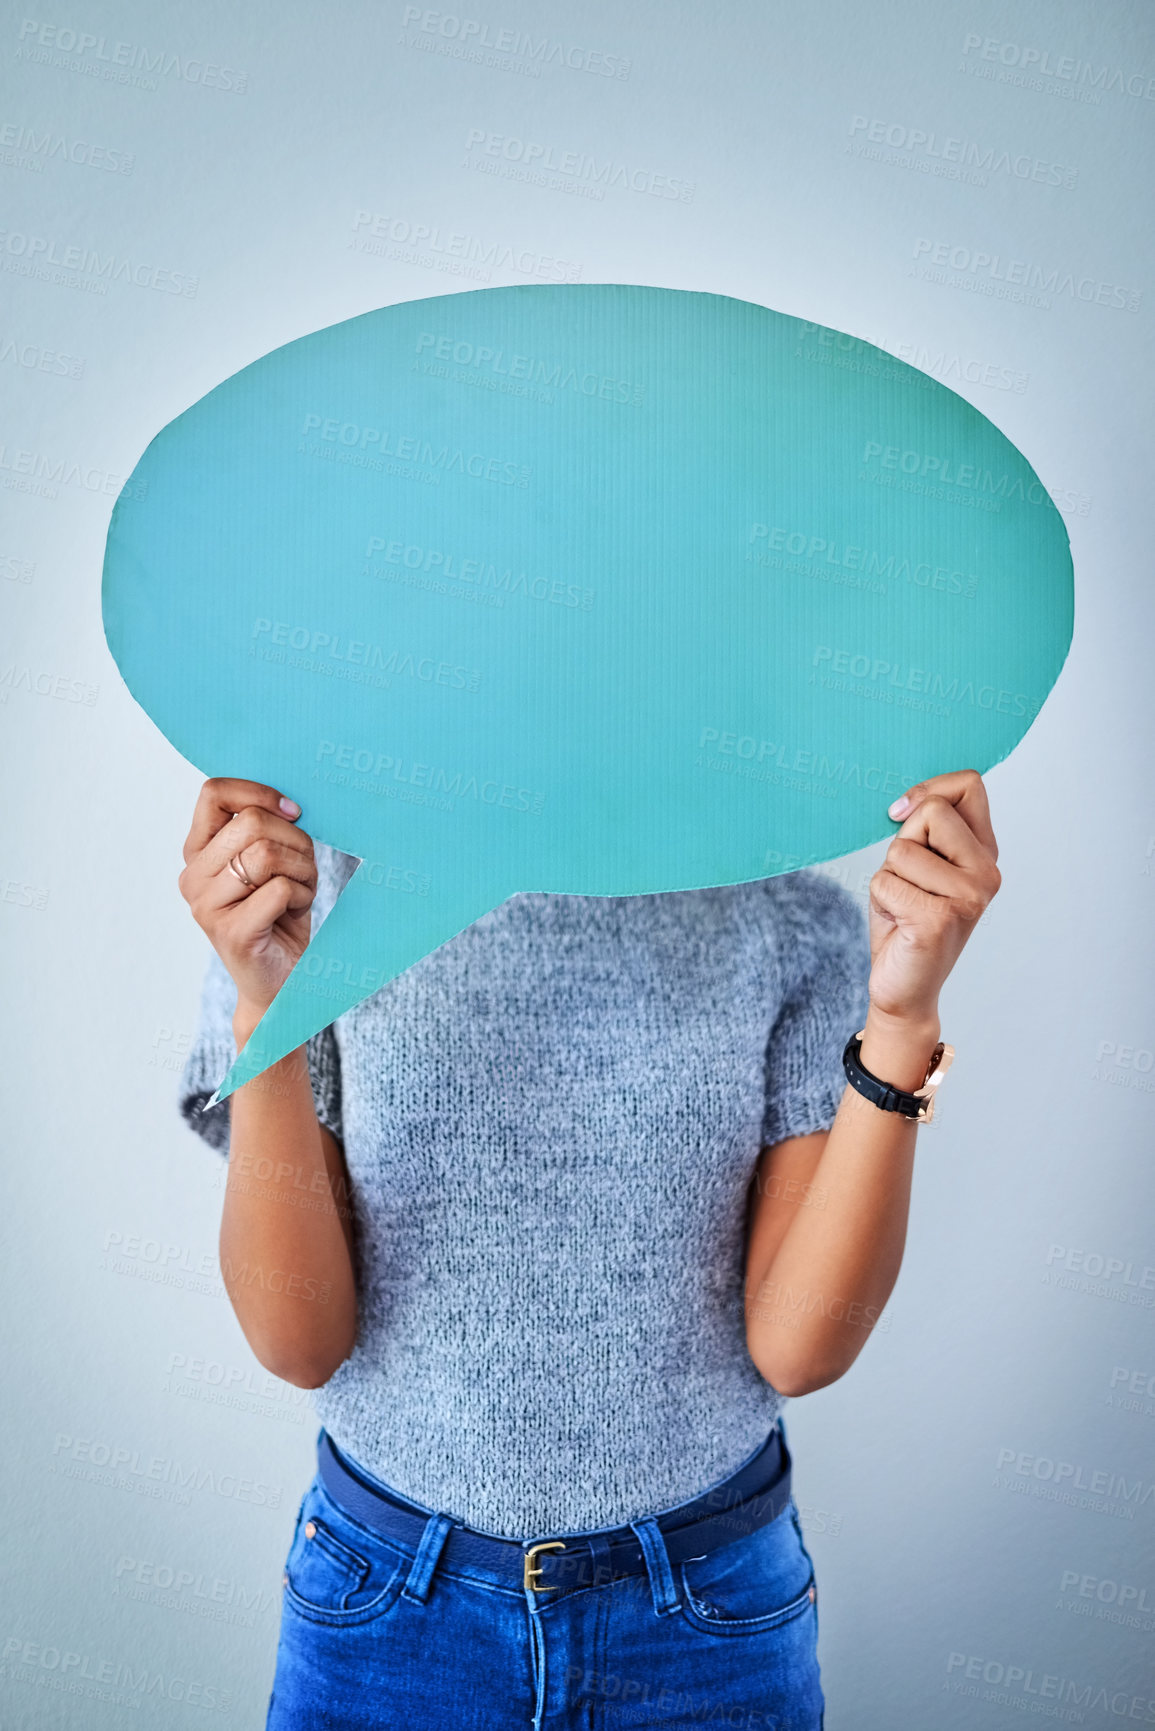 Buy stock photo Shot of an unrecognizable woman holding up a speech bubble against a blue background